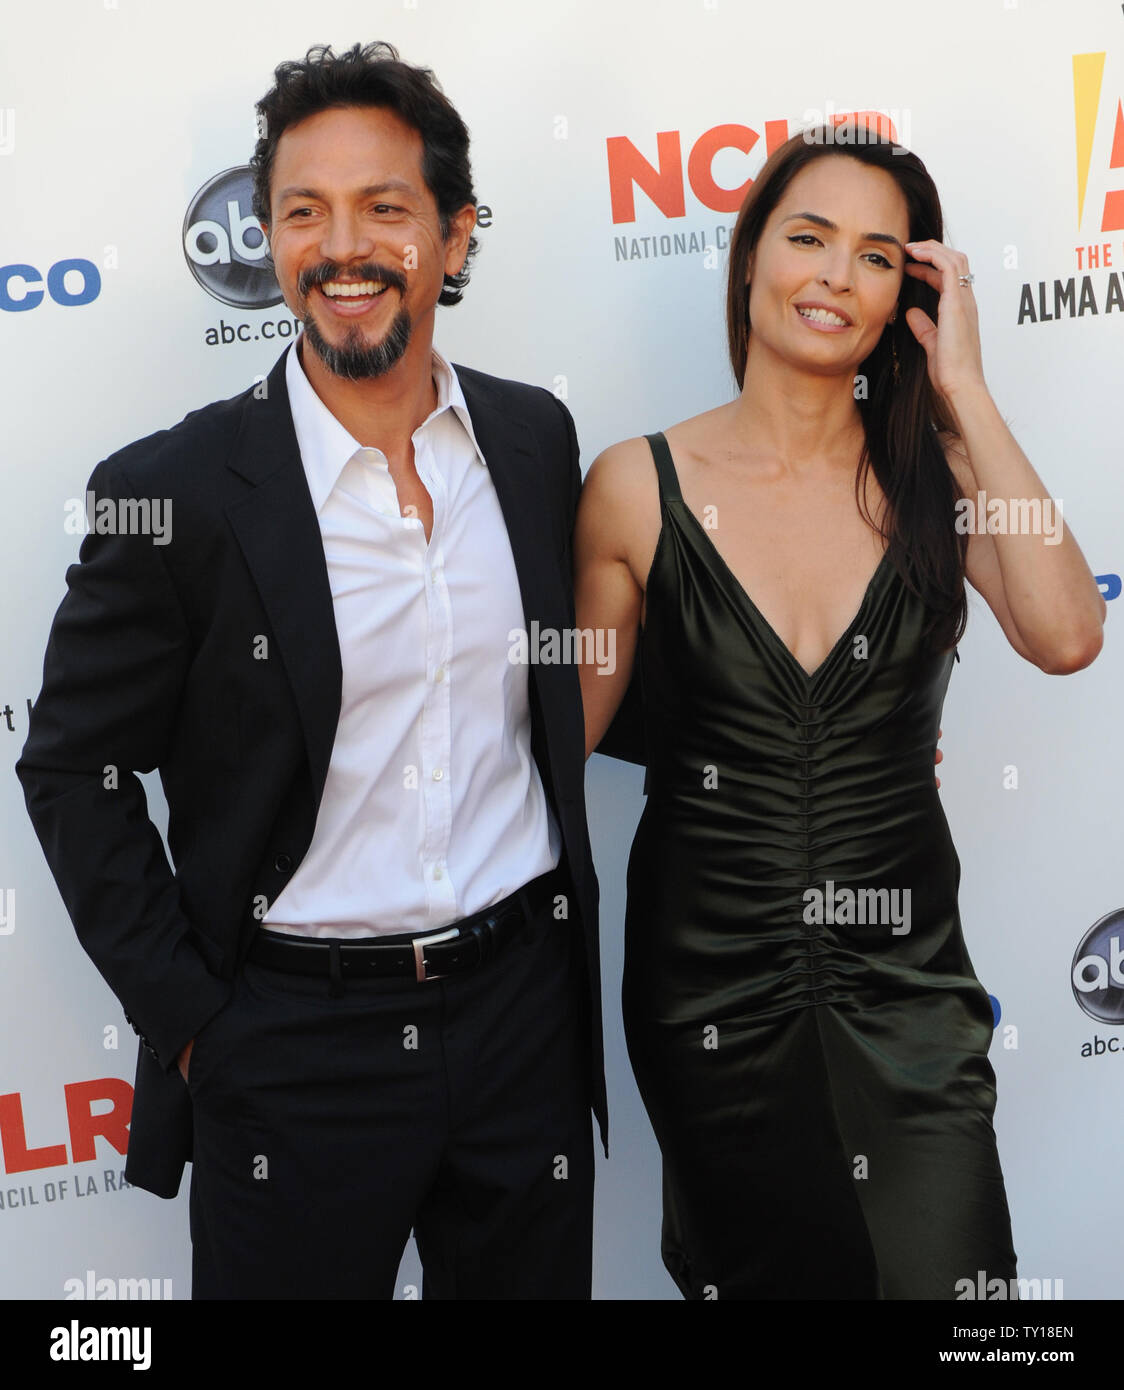 Benjamin Bratt and his wife Talisa Soto arrive for the ALMA Awards at UCLA's Royce Hall in the Westwood section of Los Angeles on September 17, 2009, in Los Angeles.     UPI/Jim Ruymen Stock Photo